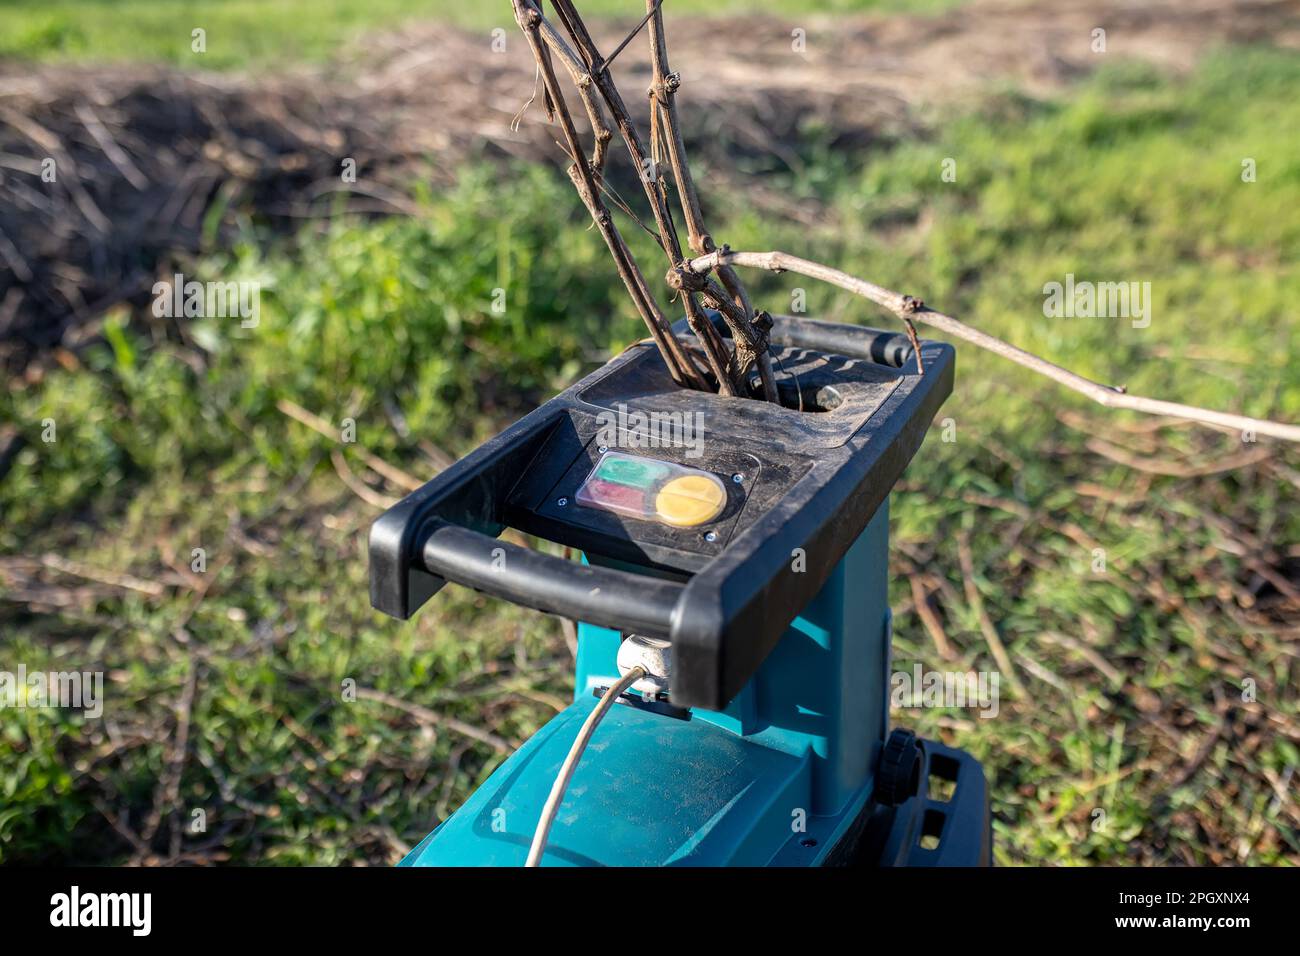 electric garden grinder to shred cut tree branches during spring cleaning Opposite a pile of dry branches in the garden after pruning trees. Stock Photo